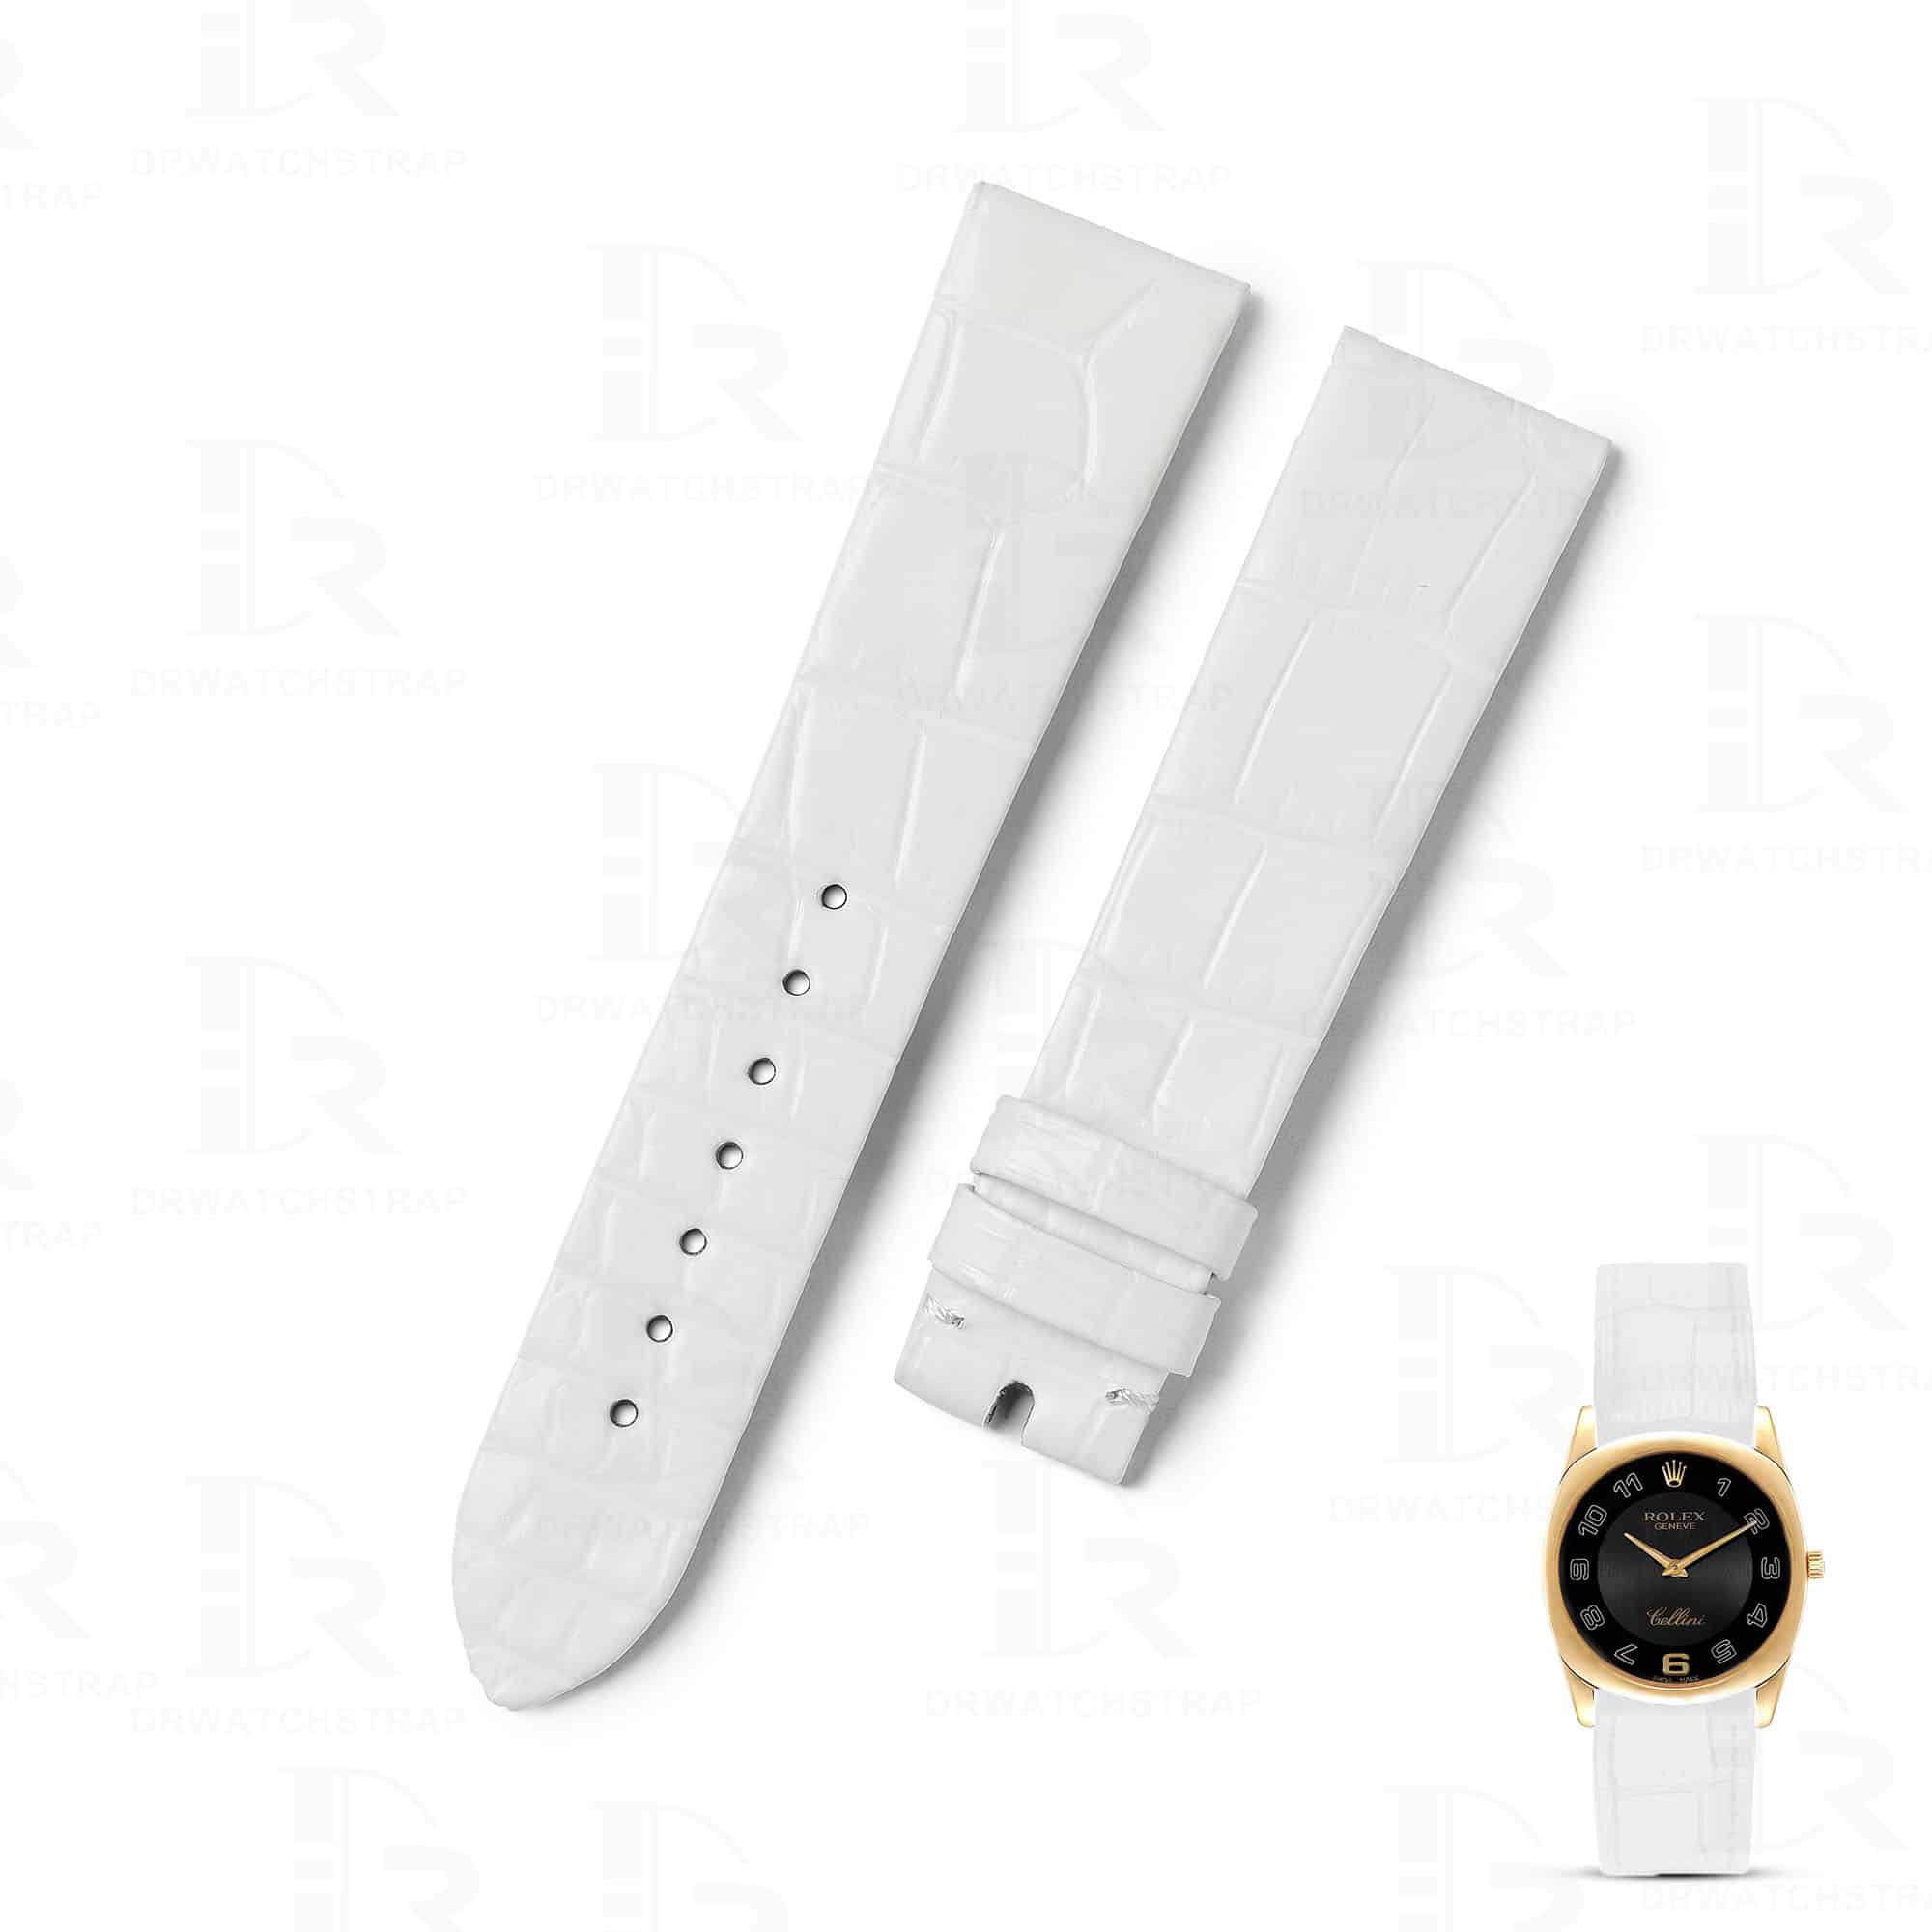 Genuine best quality alligator crocodile white Belly-scale replacement leather watch band and strap for Rolex celline old model ladies men watches online - OEM handmade leather straps and watch bands for sale at a low price